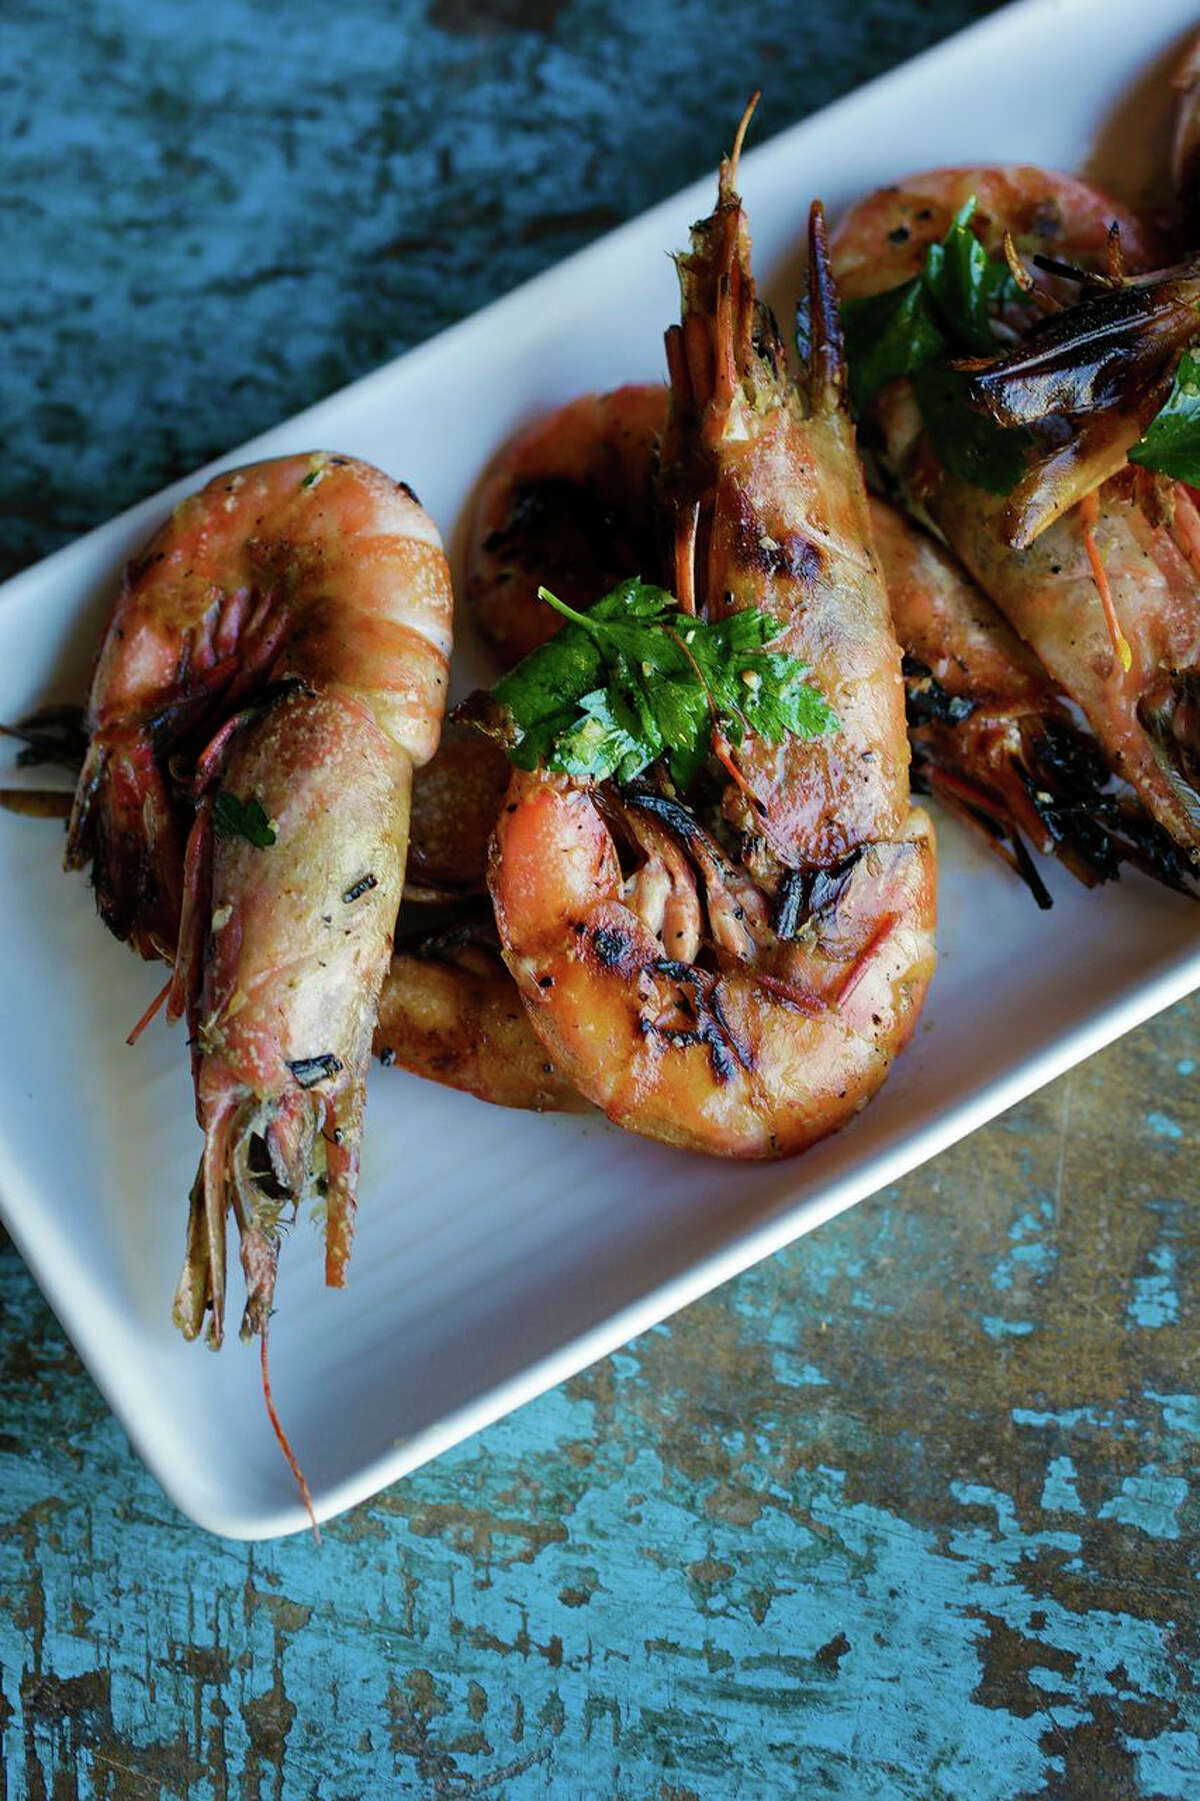 Royal Red Shrimp with garlic butter at Peche Seafood Grill in New Orleans